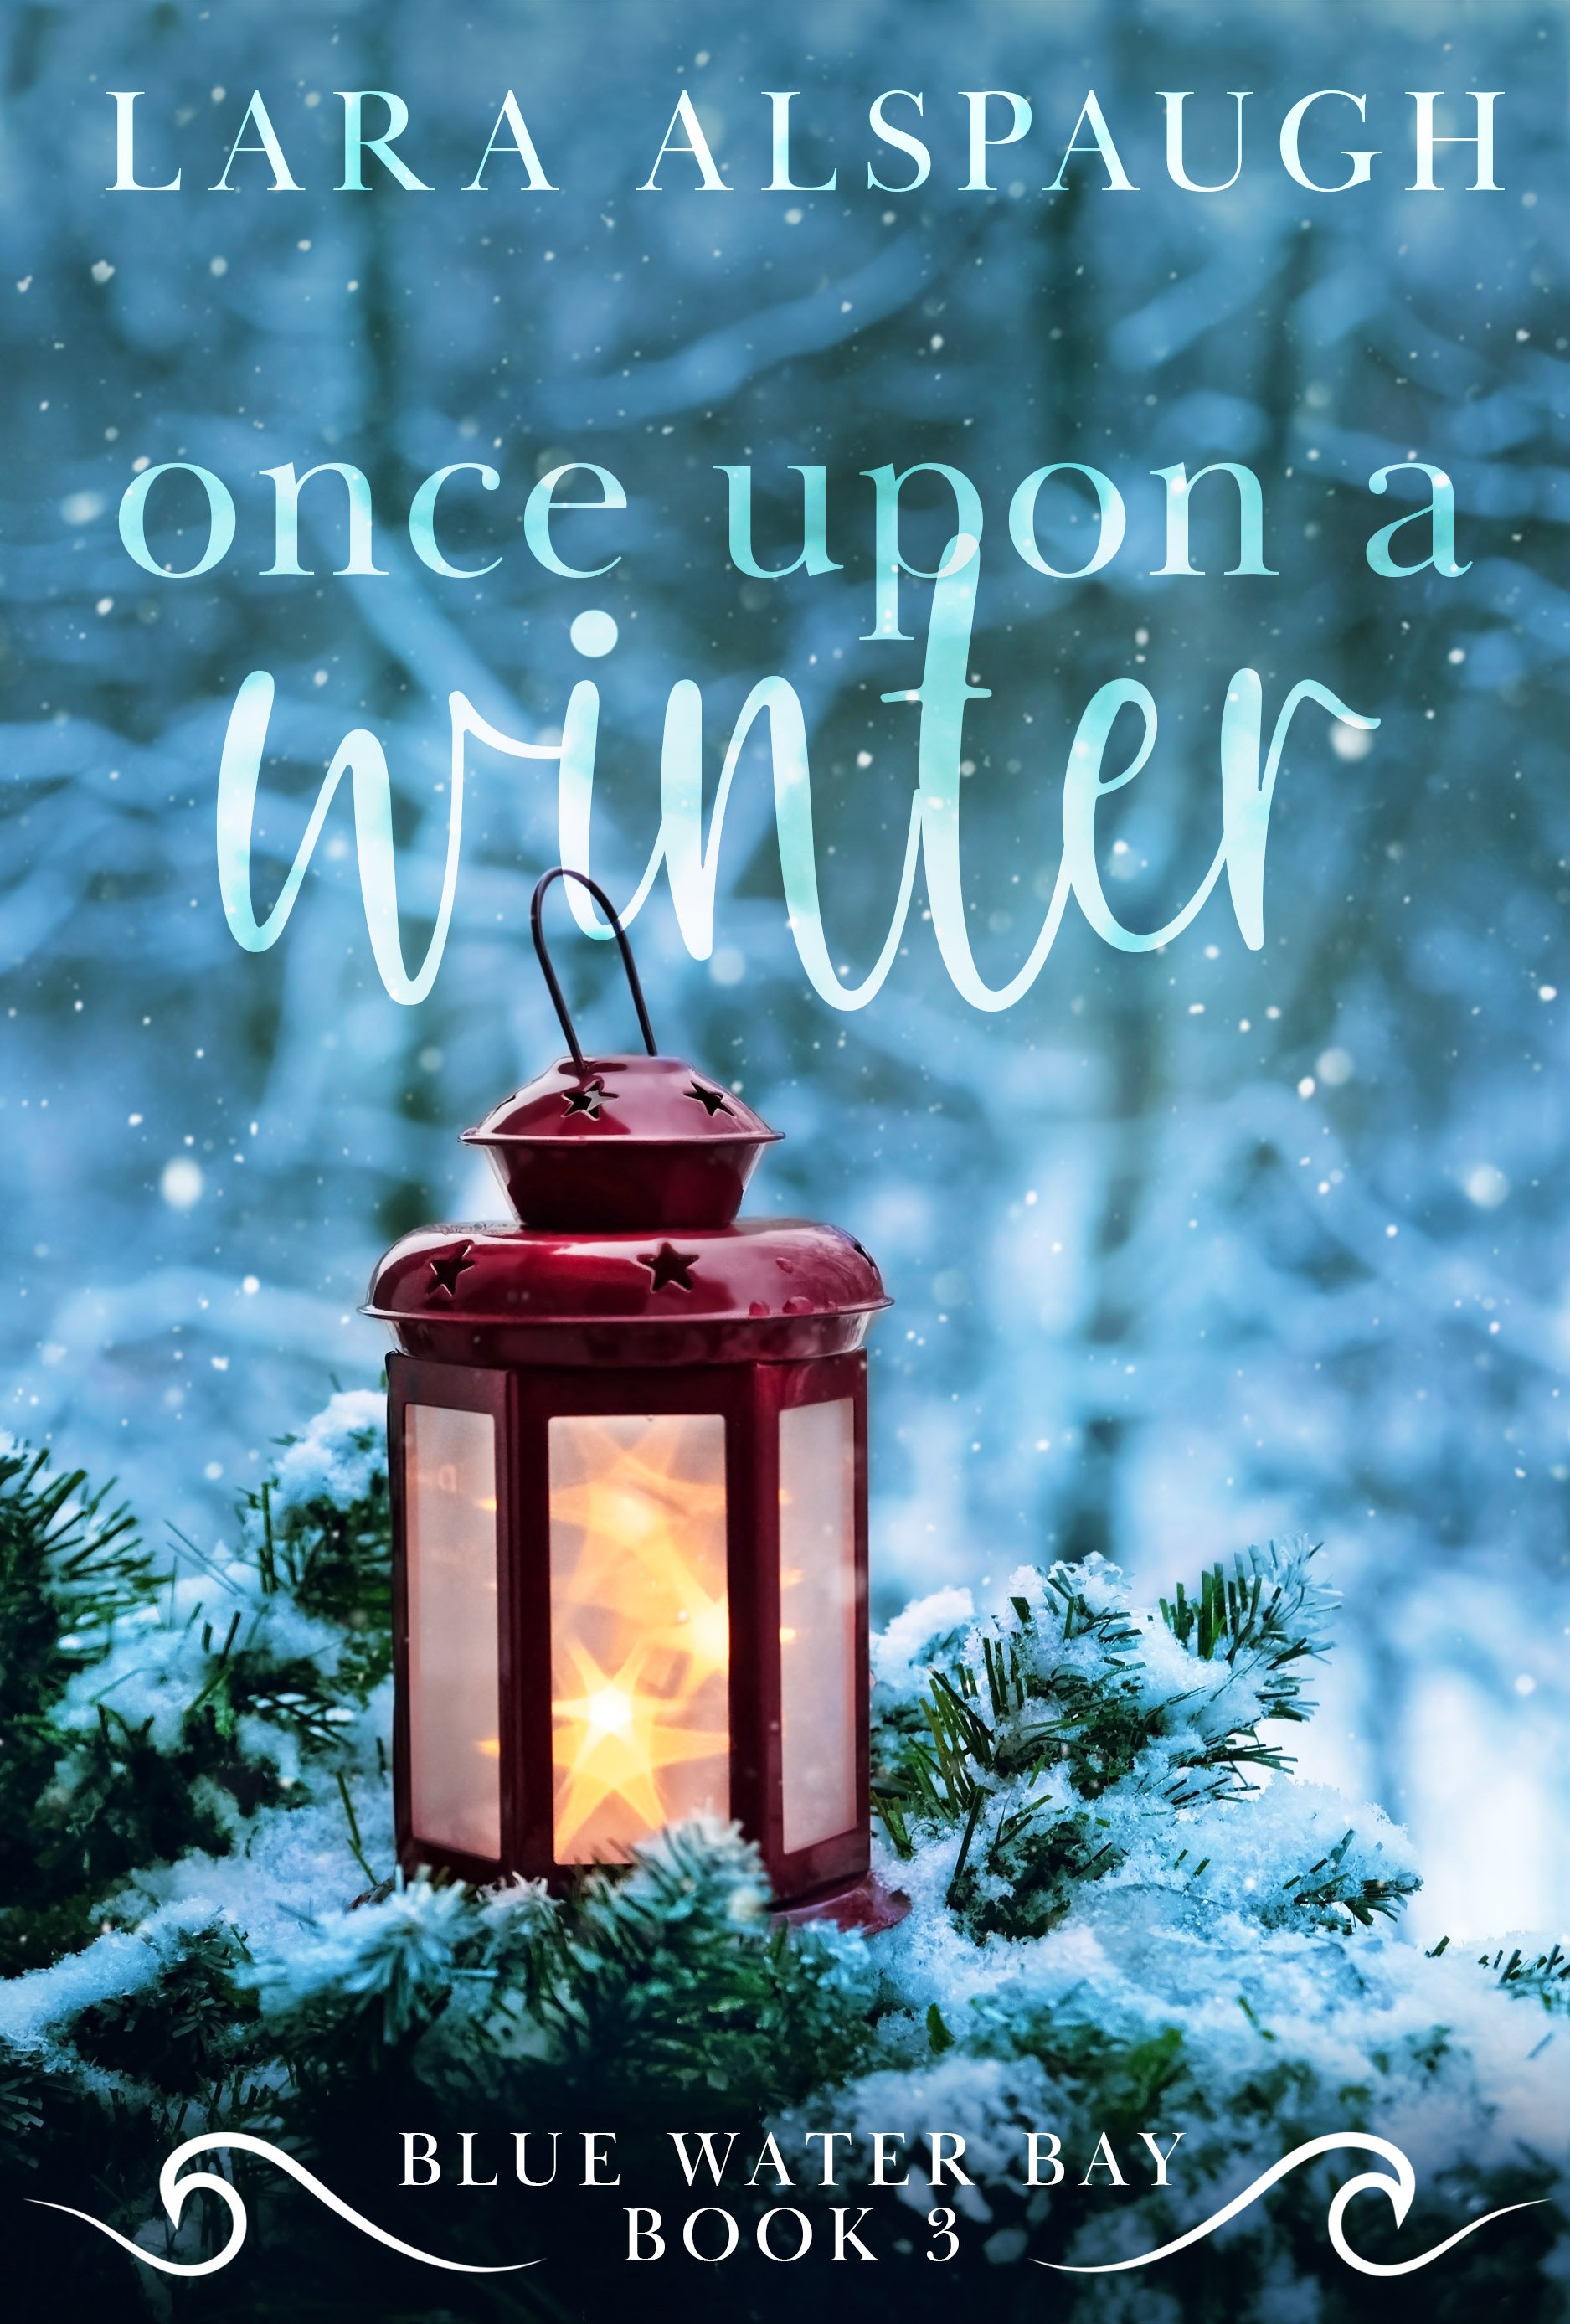 Once Upon a Winter by Lara Alspaugh